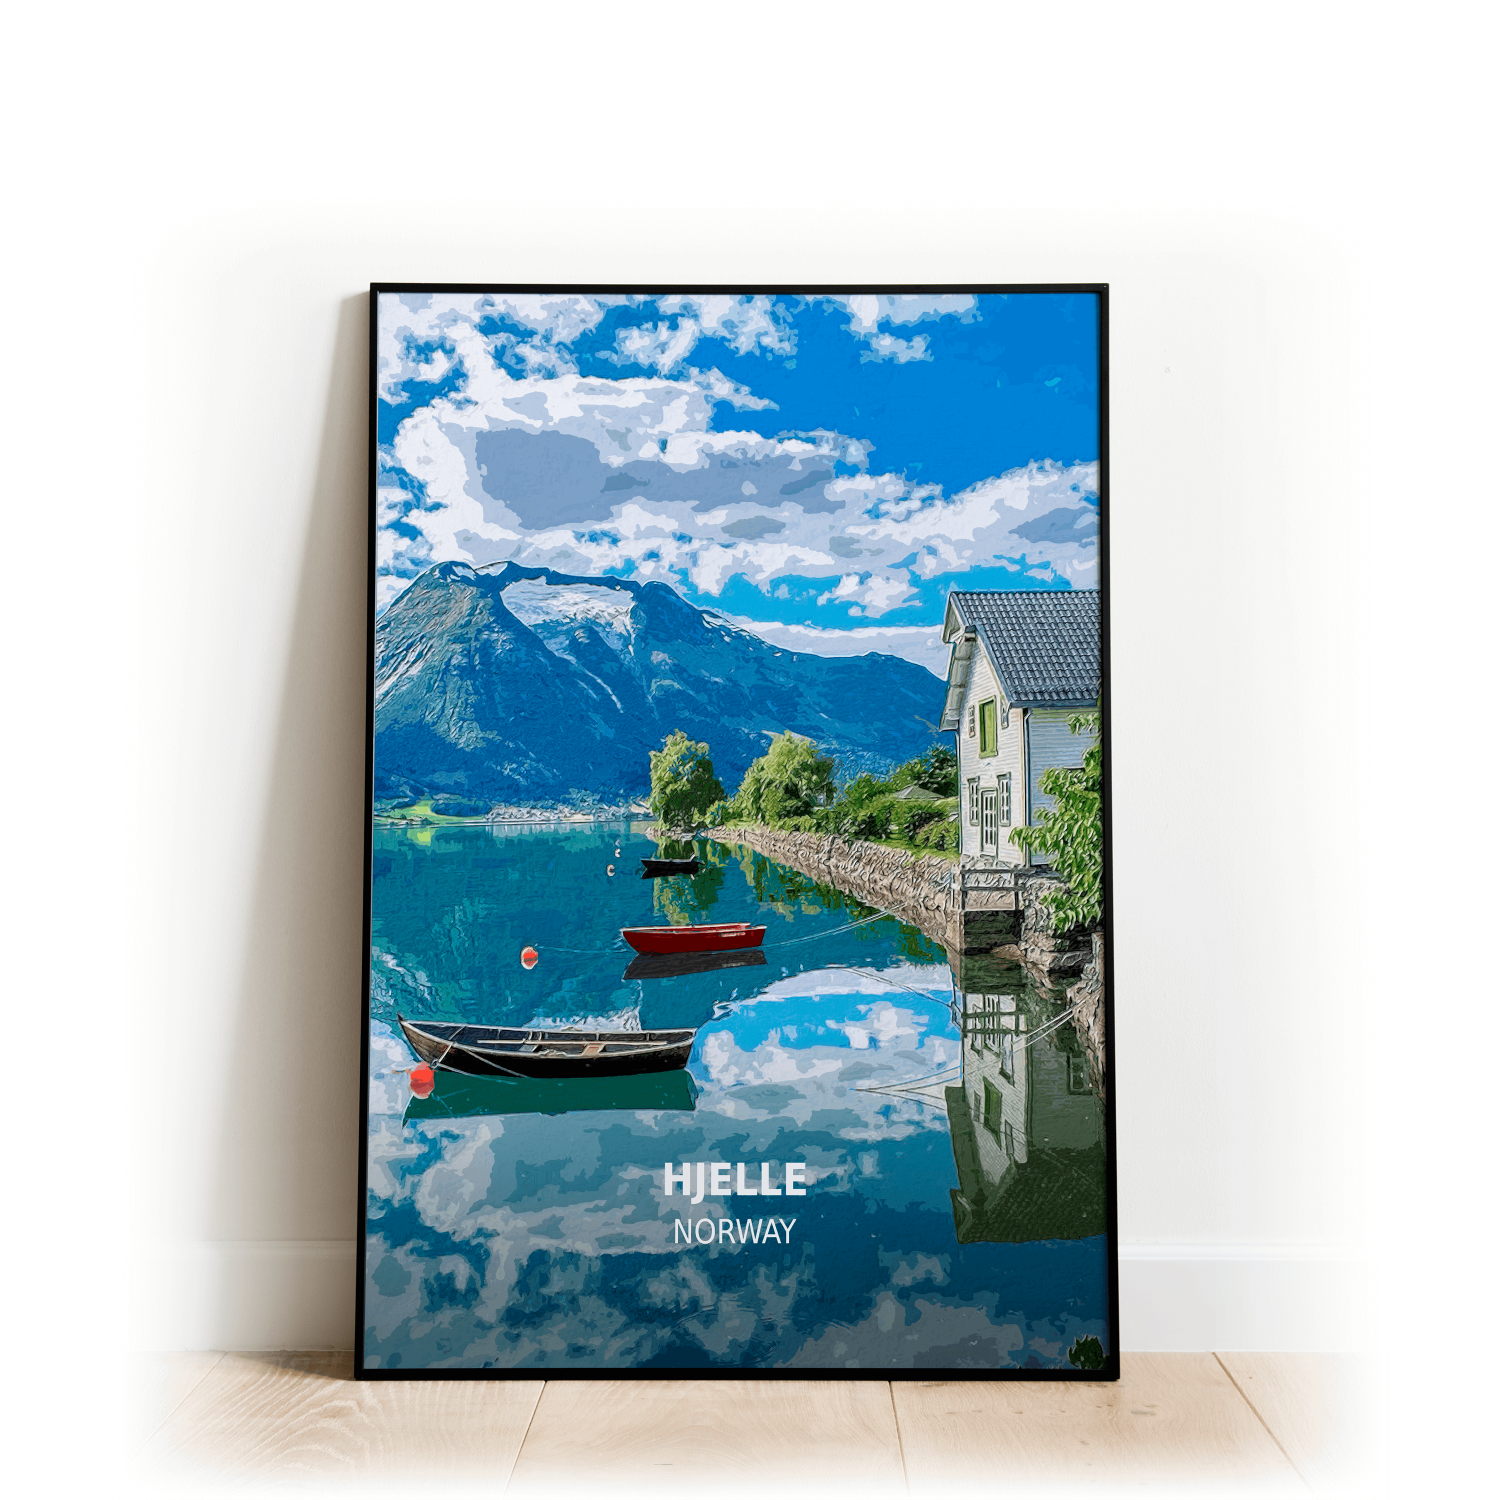 Hjelle - Norway - Print - A4 - Standard - Print Only